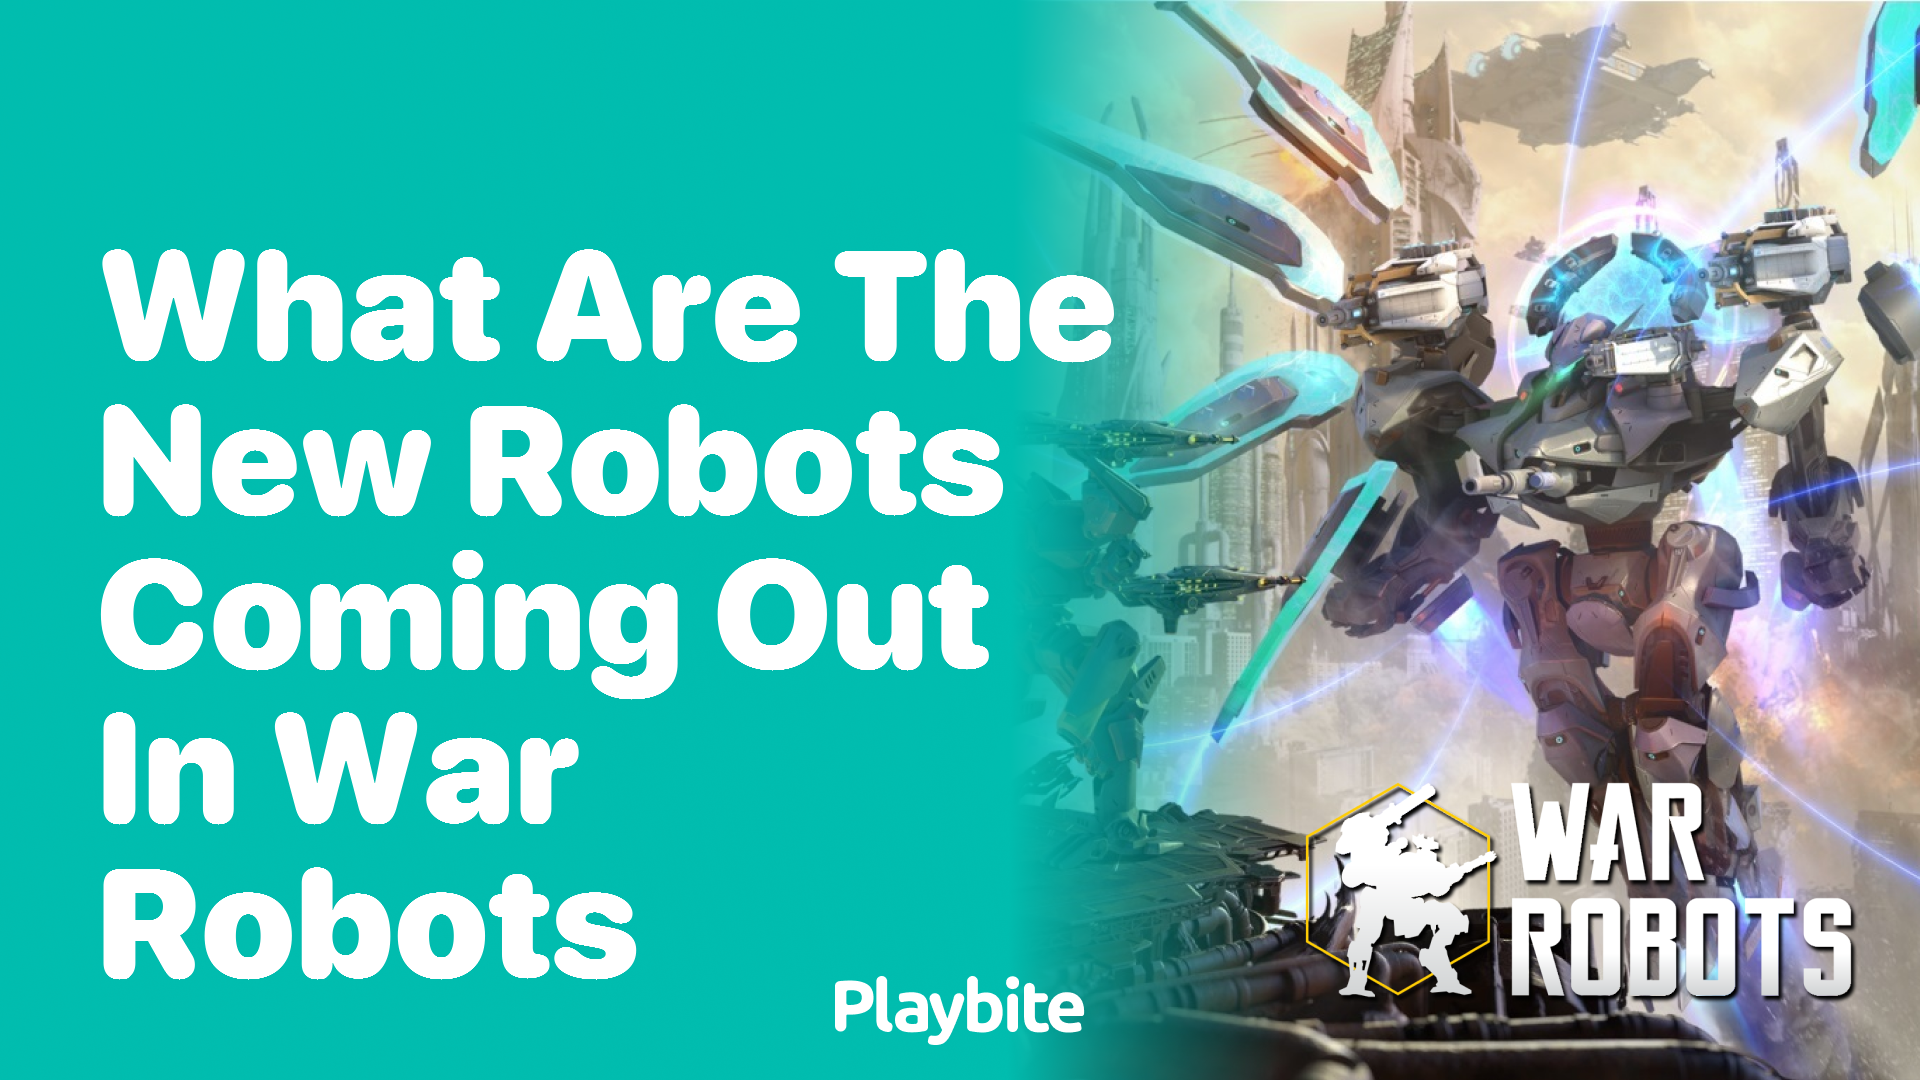 What Are the New Robots Coming Out in War Robots?